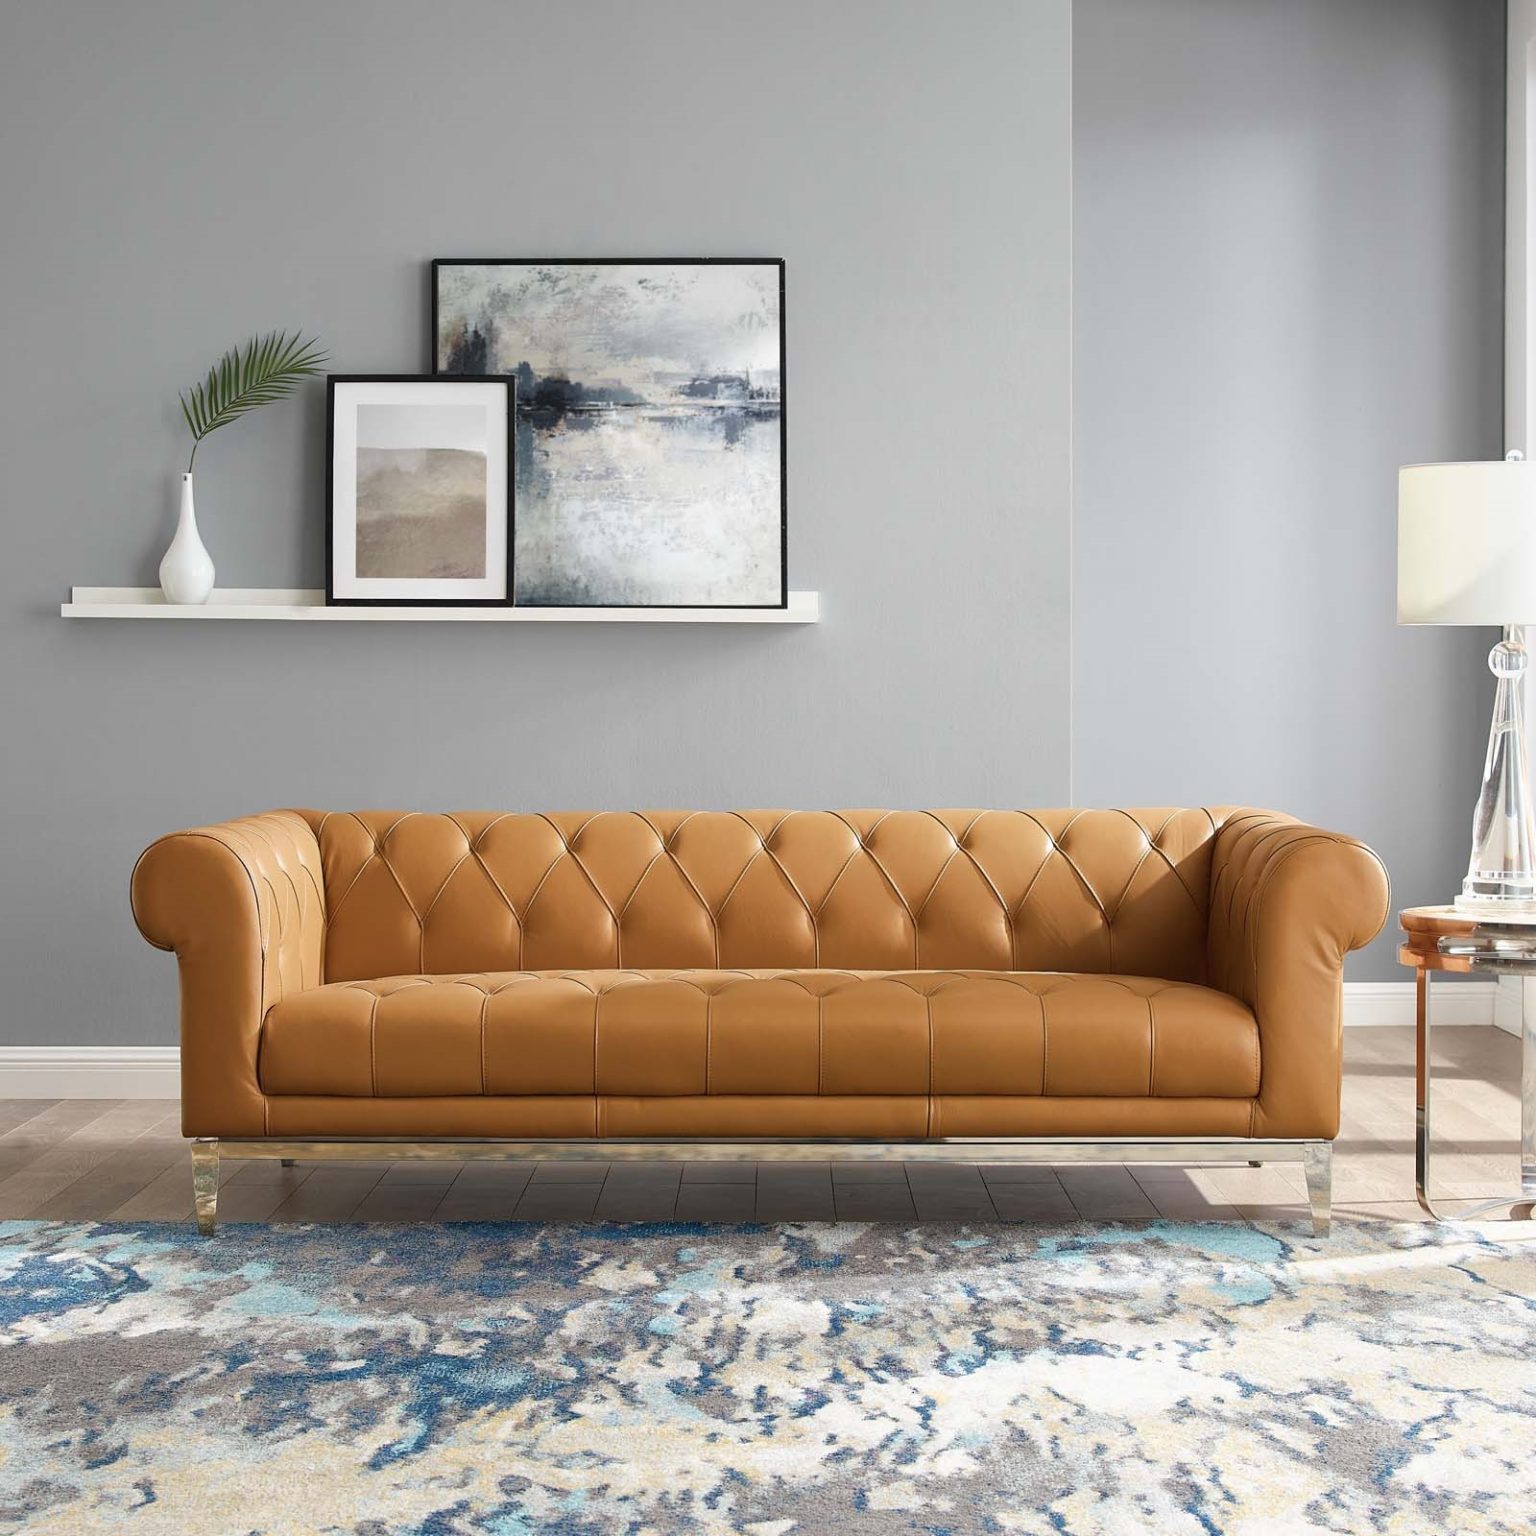 Idyll Tufted Button Upholstered Leather Chesterfield Sofa in Tan - Hyme